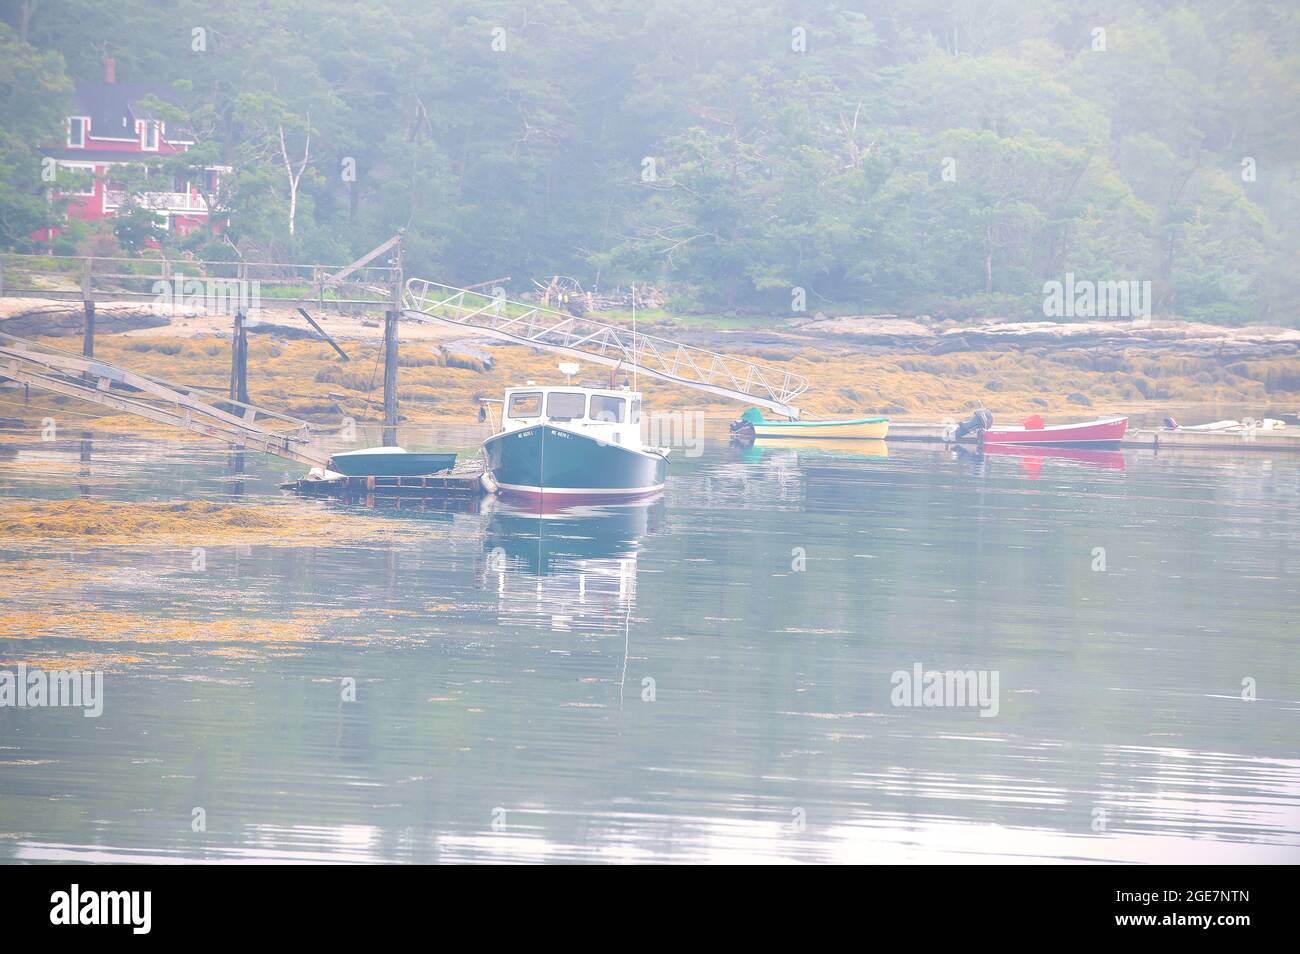 Lobster boats await the lifting of an early morning fog in East Boothbay, Maine, USA Stock Photo